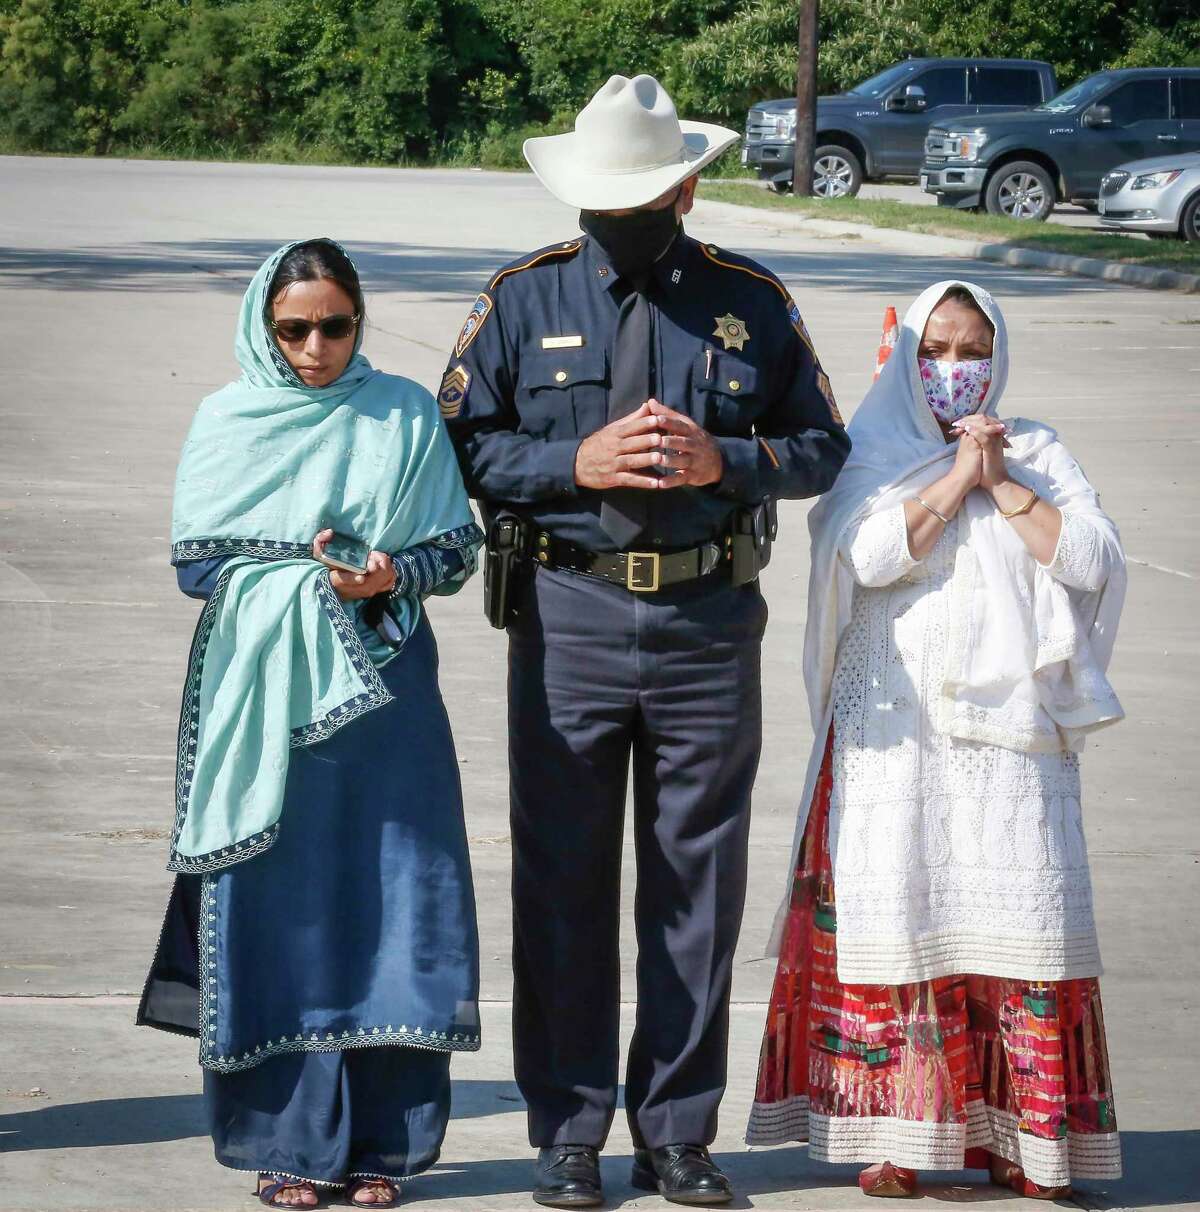 Sheriff Deputy Sandeep Dhaliwal's sisters Harpreet Rai (l), Ranjeet Thandi (r) Harris County Sheriff Sergeant Nasir Abbasi pause during the renaming of a portion of Beltway 8 (between 249 and 290) on the Harris County Toll Road Authority in northwest Harris County in honor of Sheriff Deputy Sandeep Dhaliwal ceremony at Gurdwara Sikh National Center Tuesday, Oct. 6, 2020, in Houston.